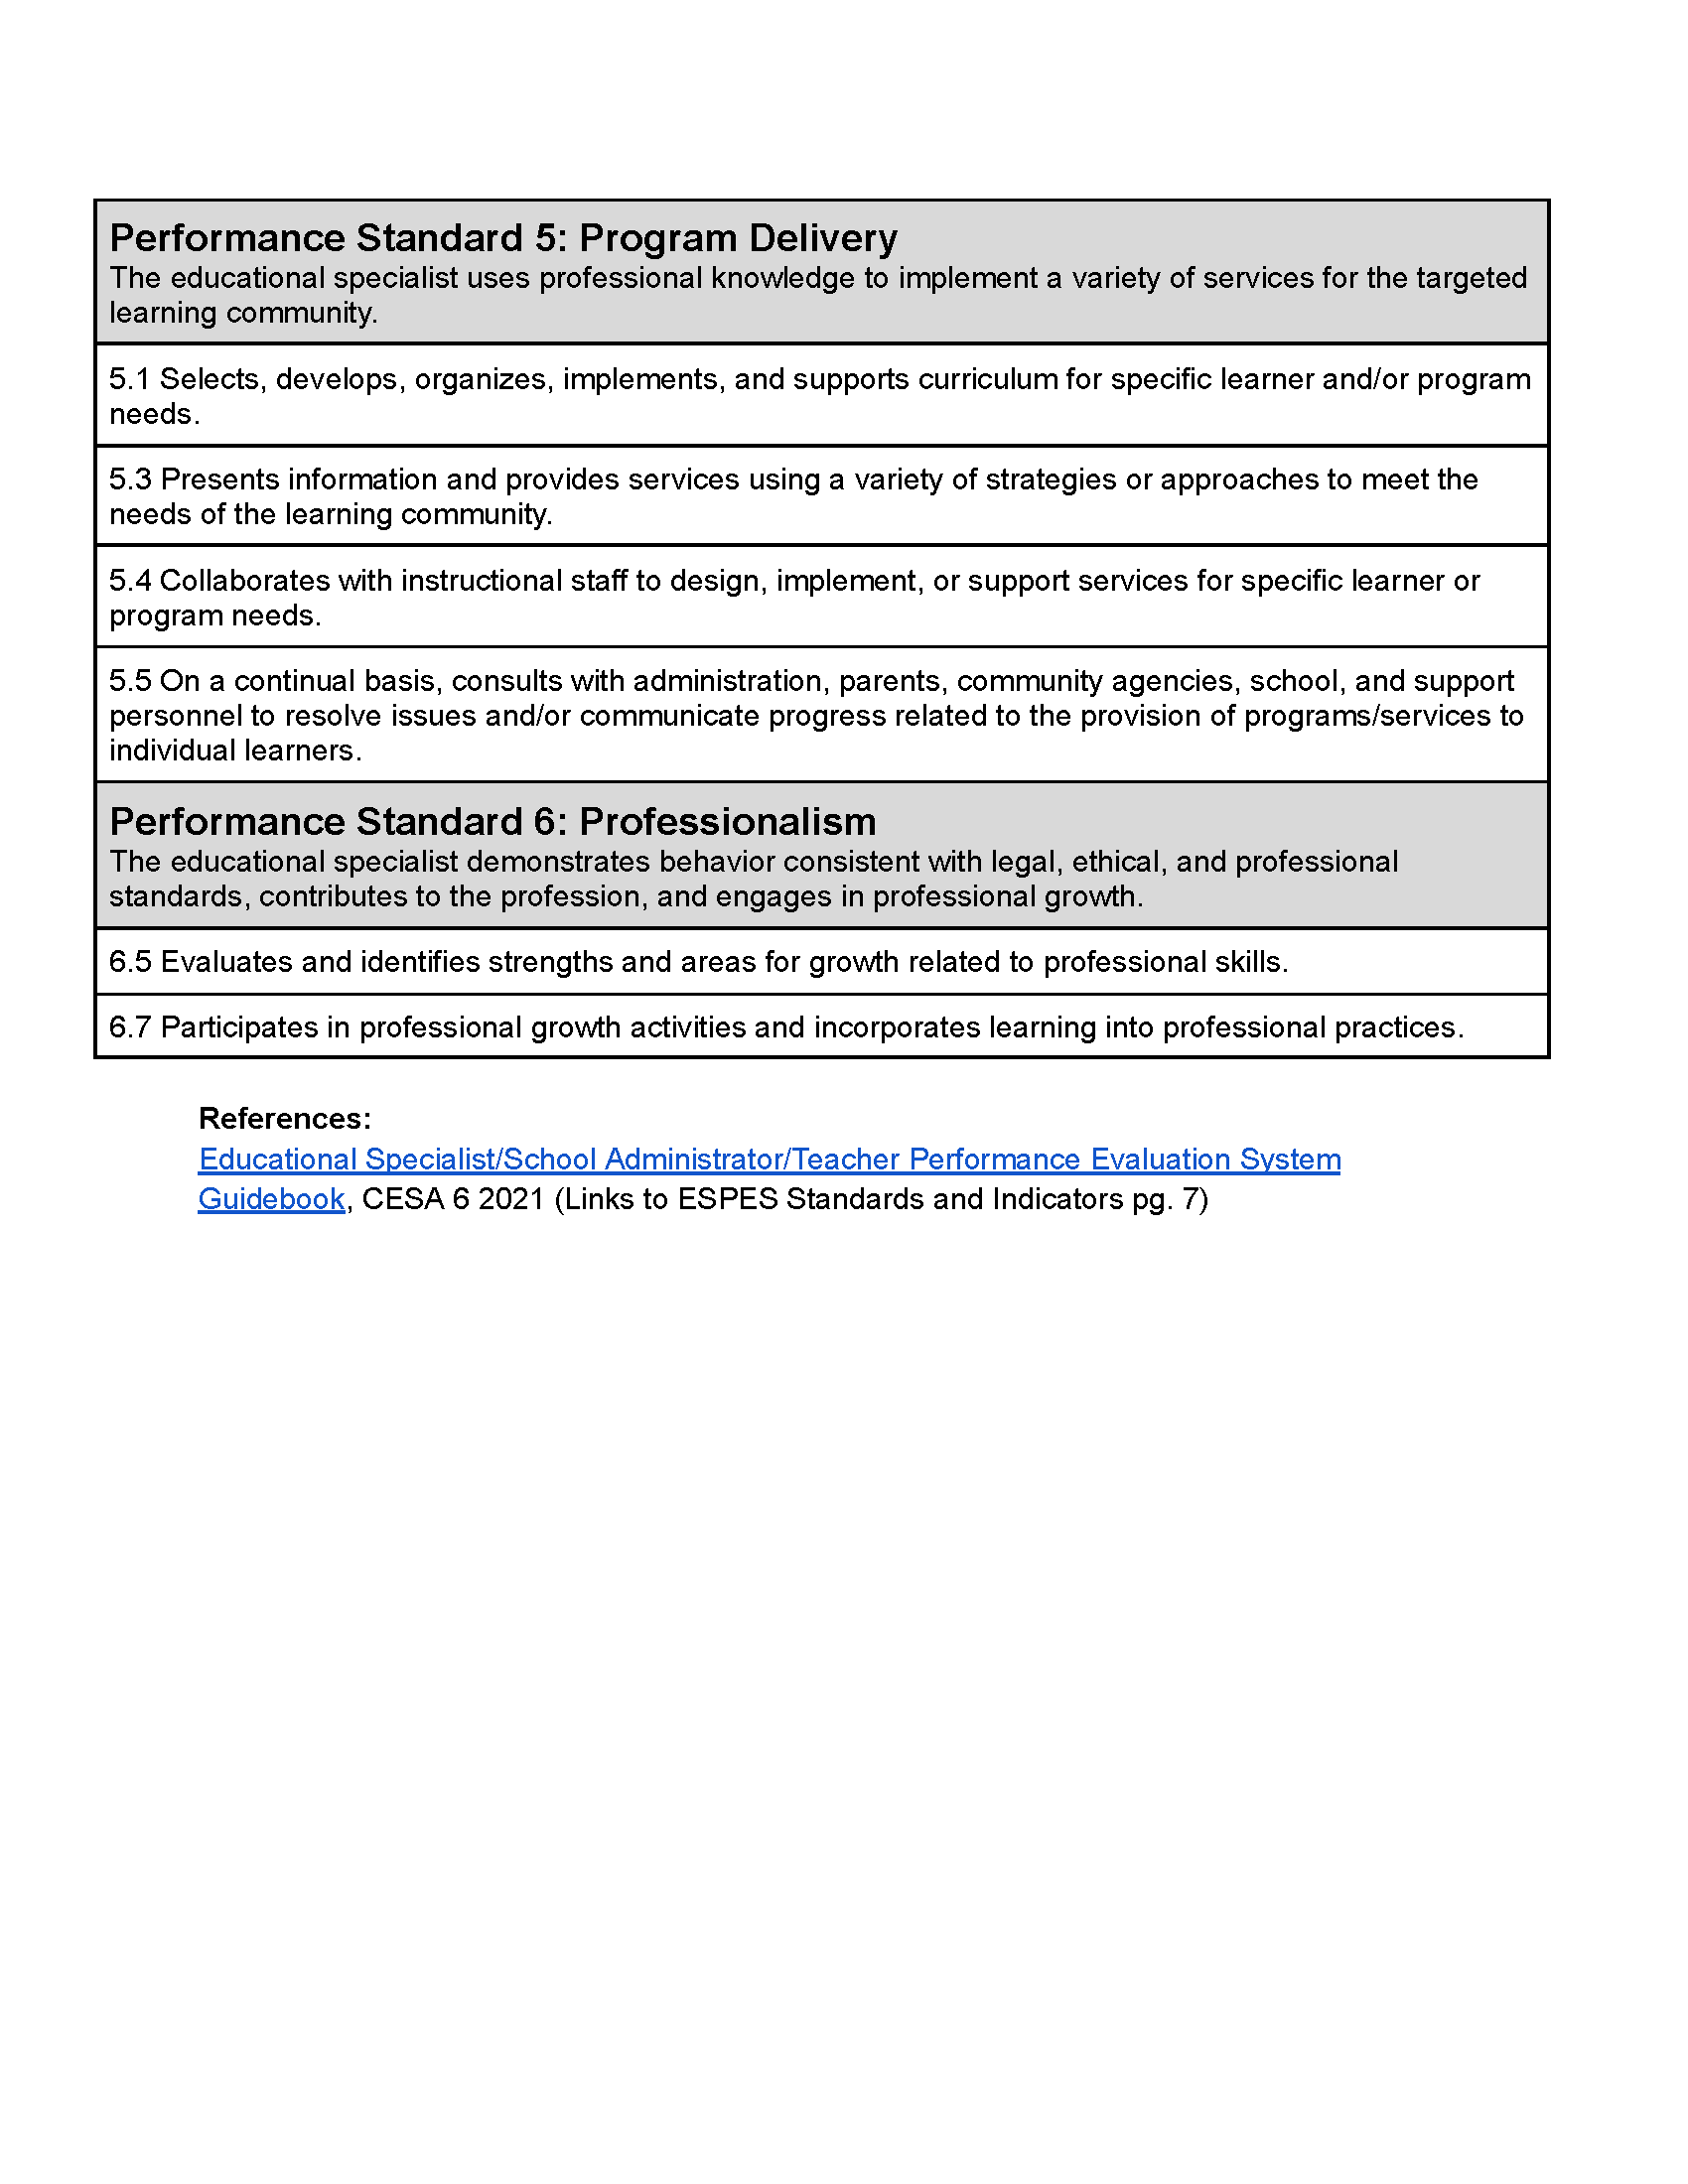 Culturally_Responsive_EP_Standards_-_Educational_Specialists_Page_2.png